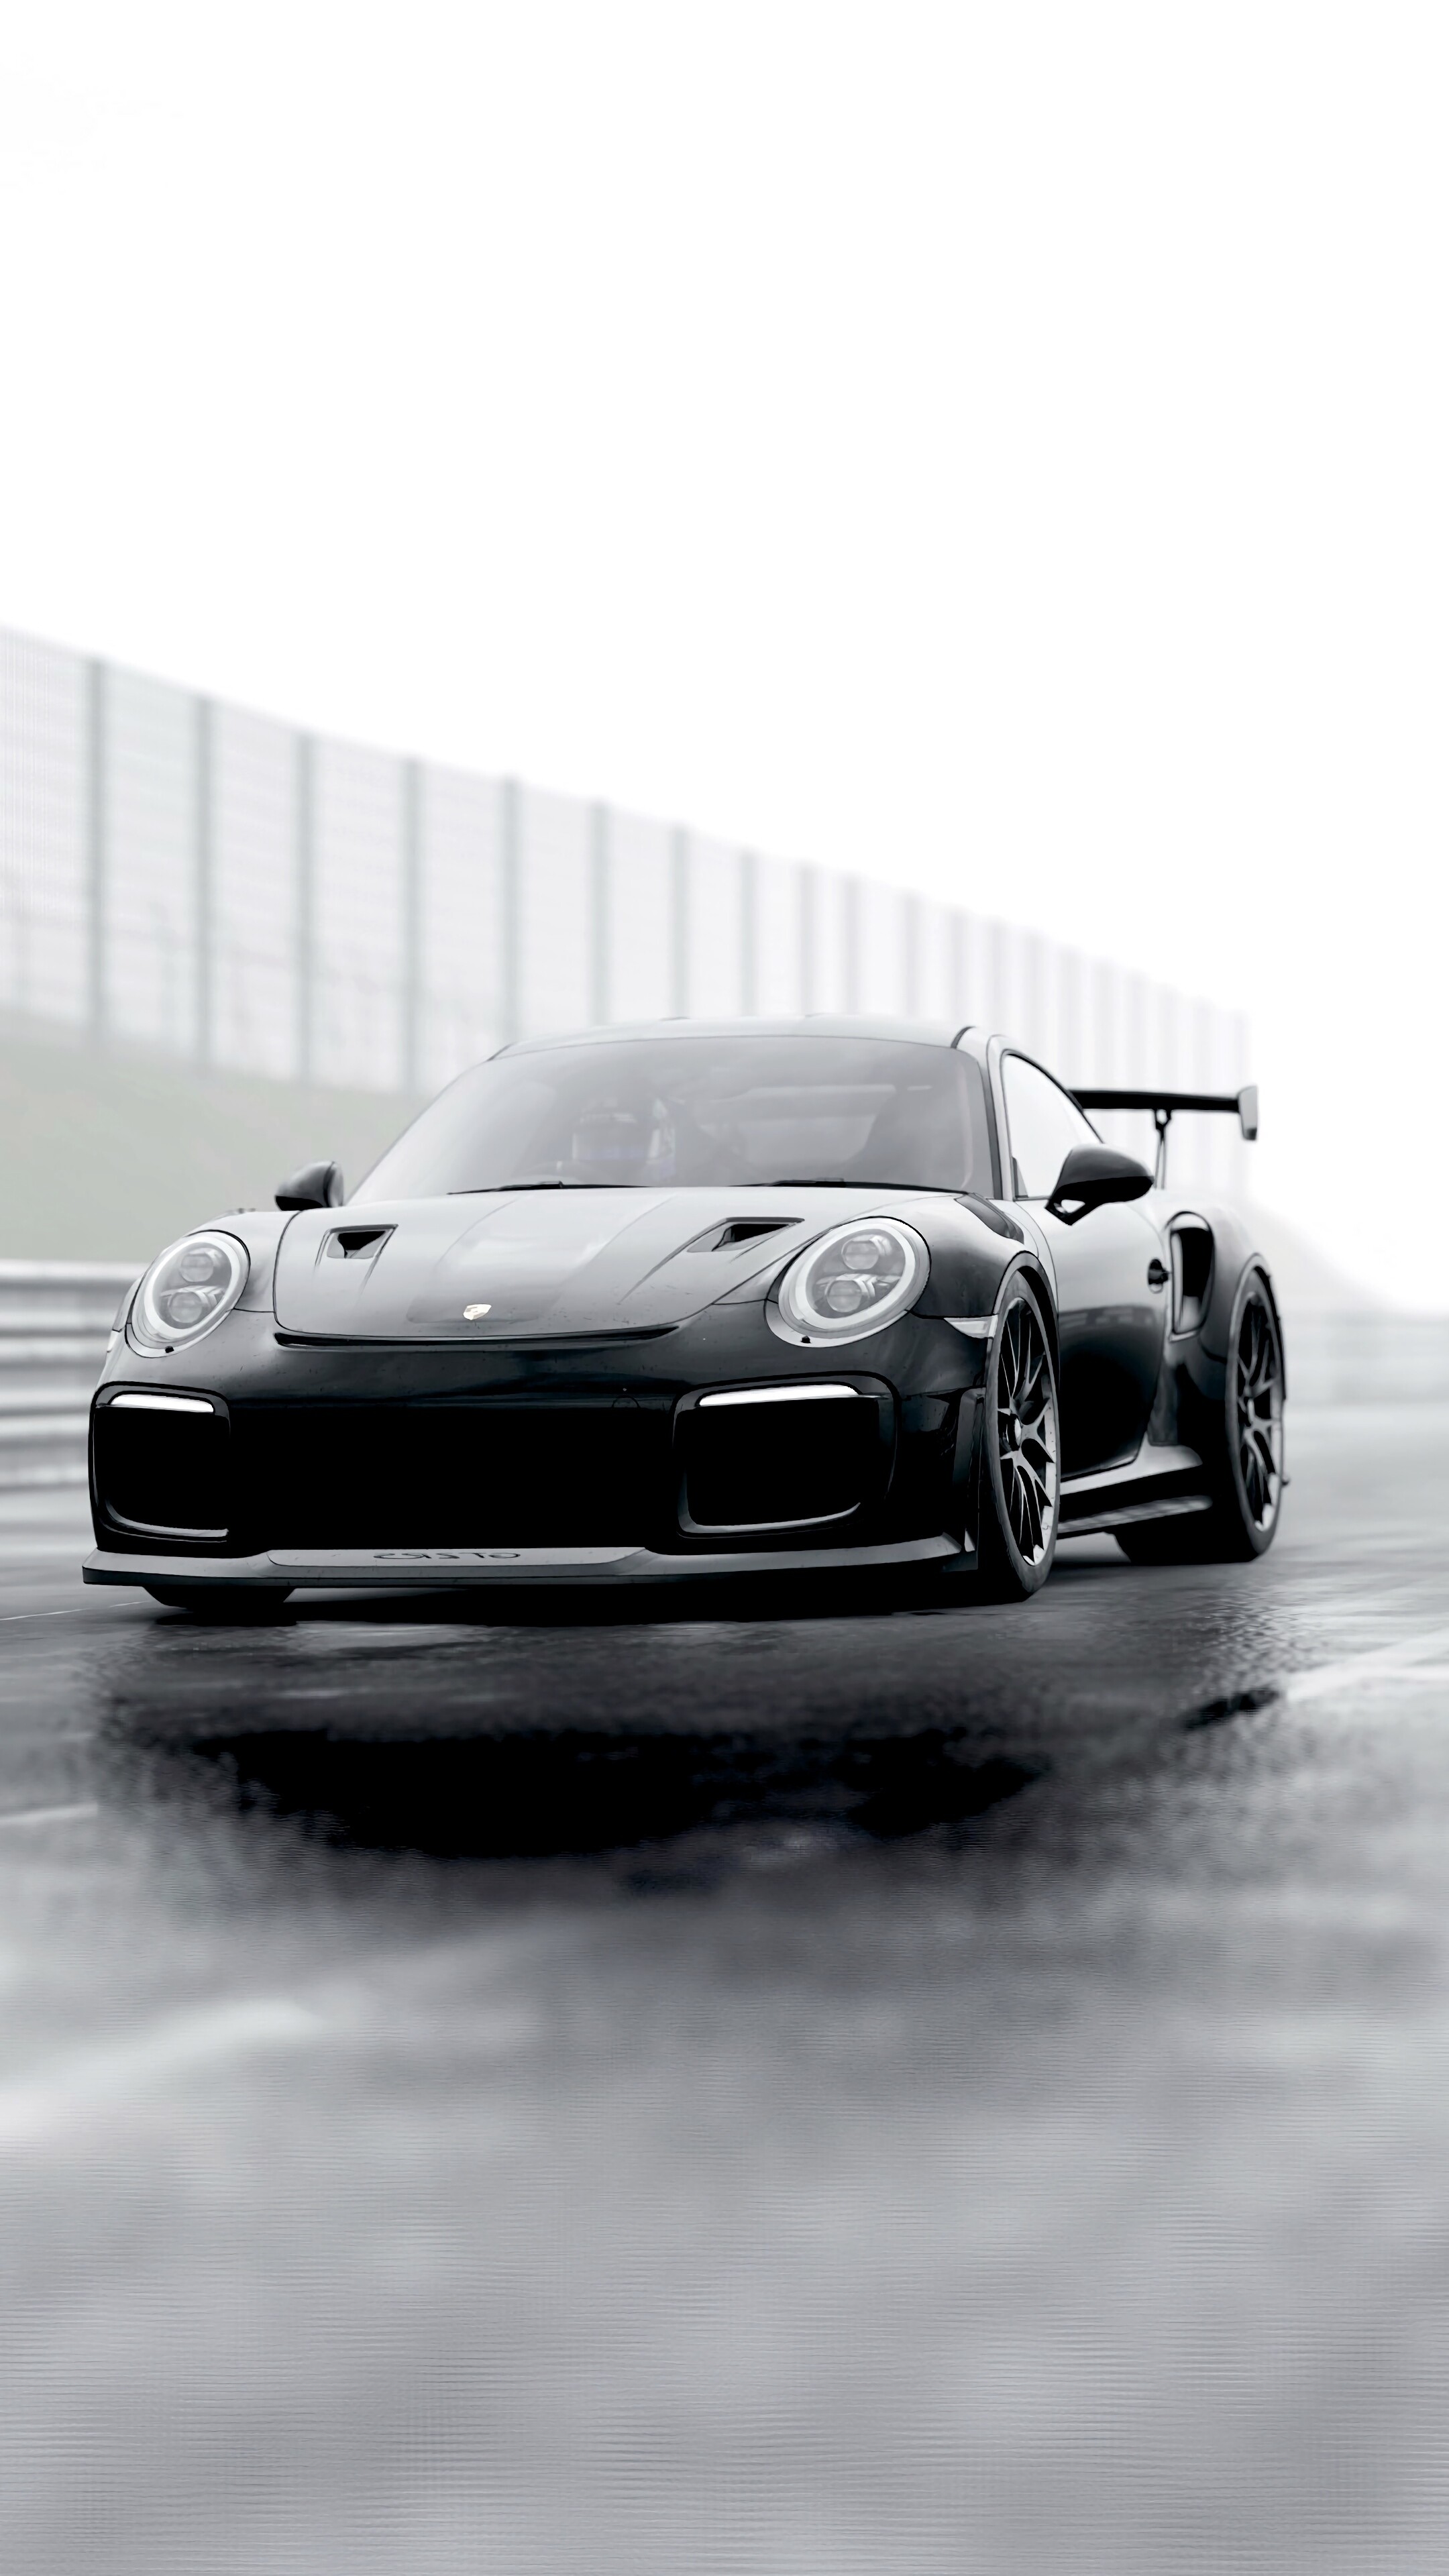 Porsche: Supercars, Front View, GT2 RS, The most expensive and fastest model among the 911 lineup. 2160x3840 4K Wallpaper.